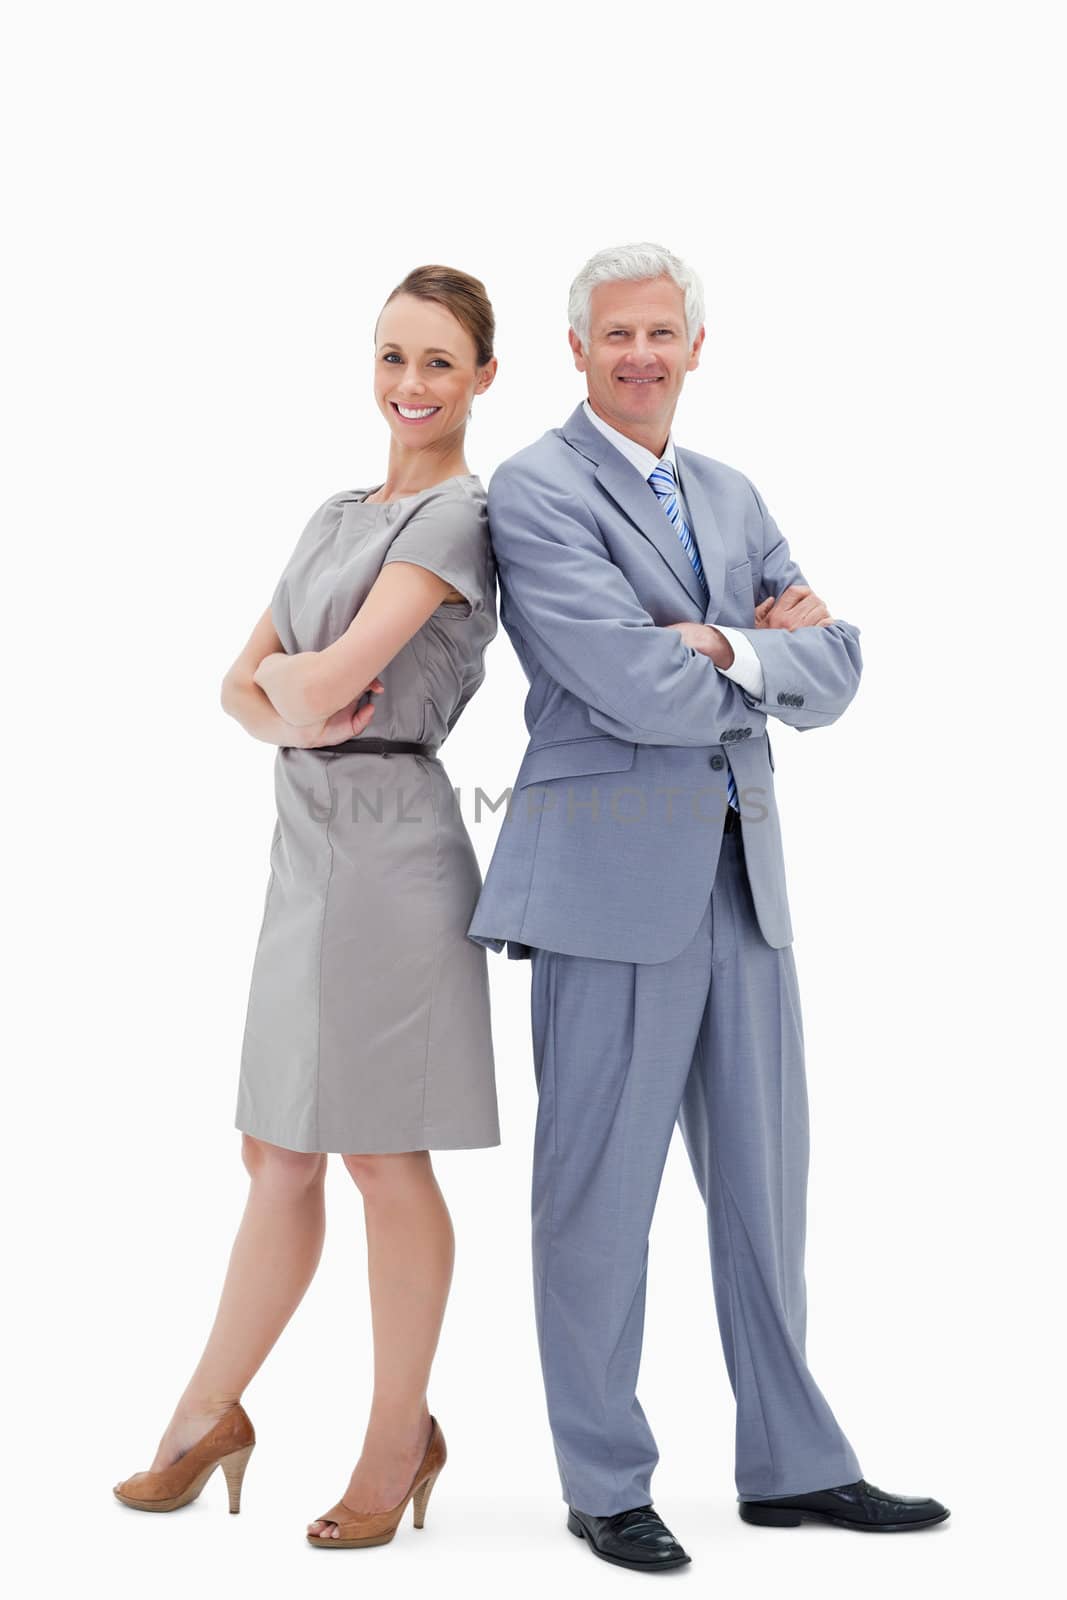 White hair businessman back to back with a woman and smiling against white background